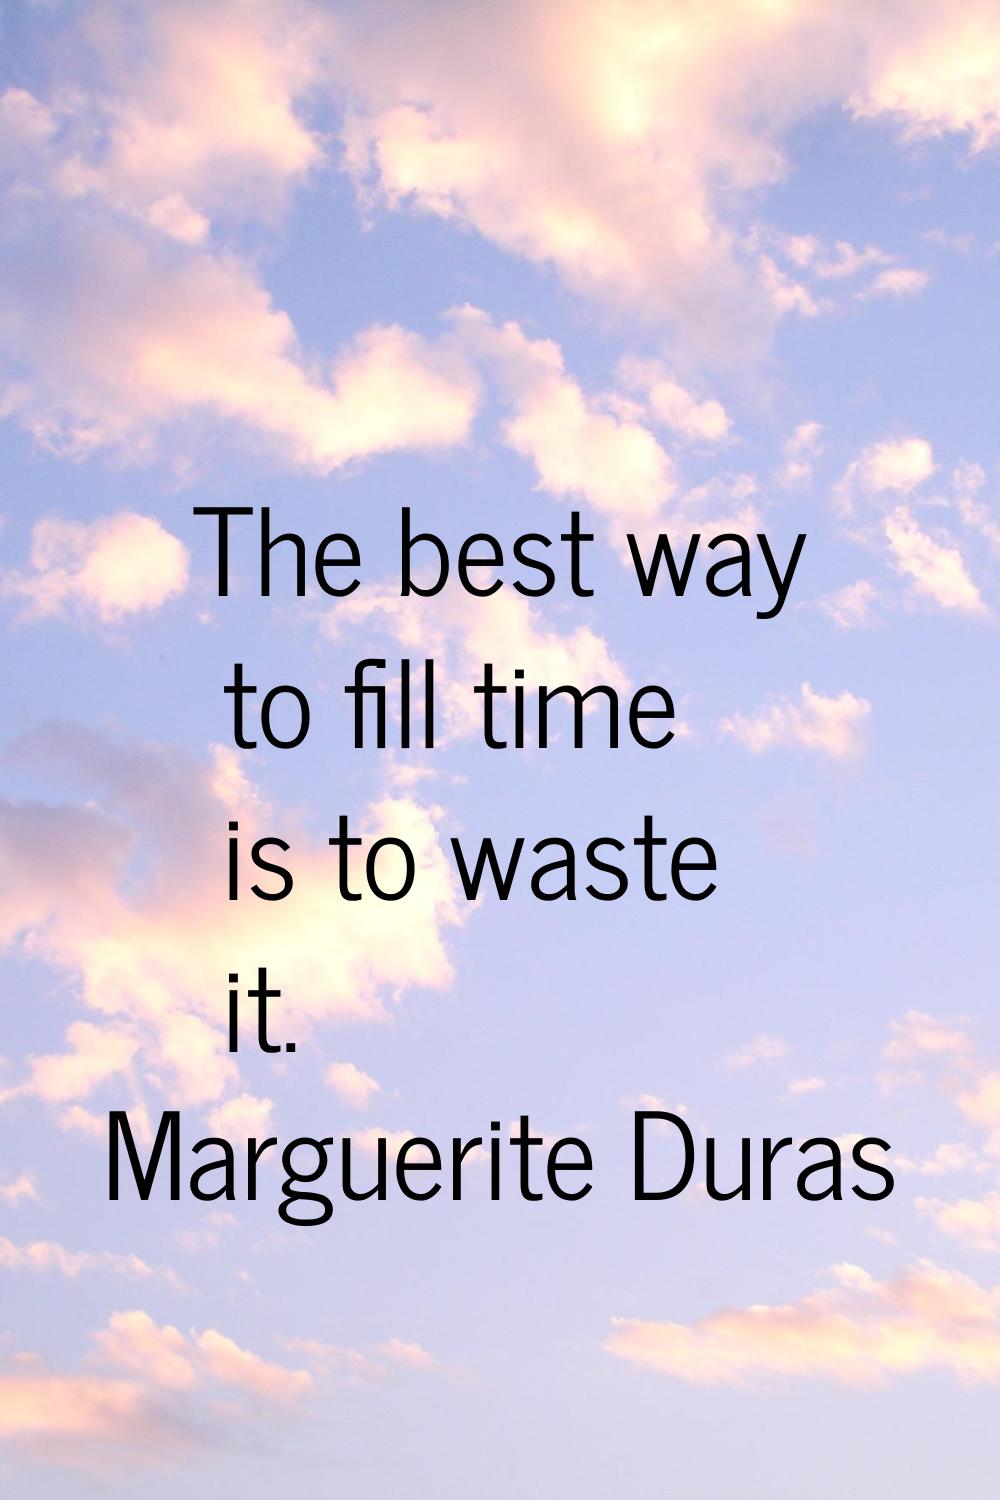 The best way to fill time is to waste it.